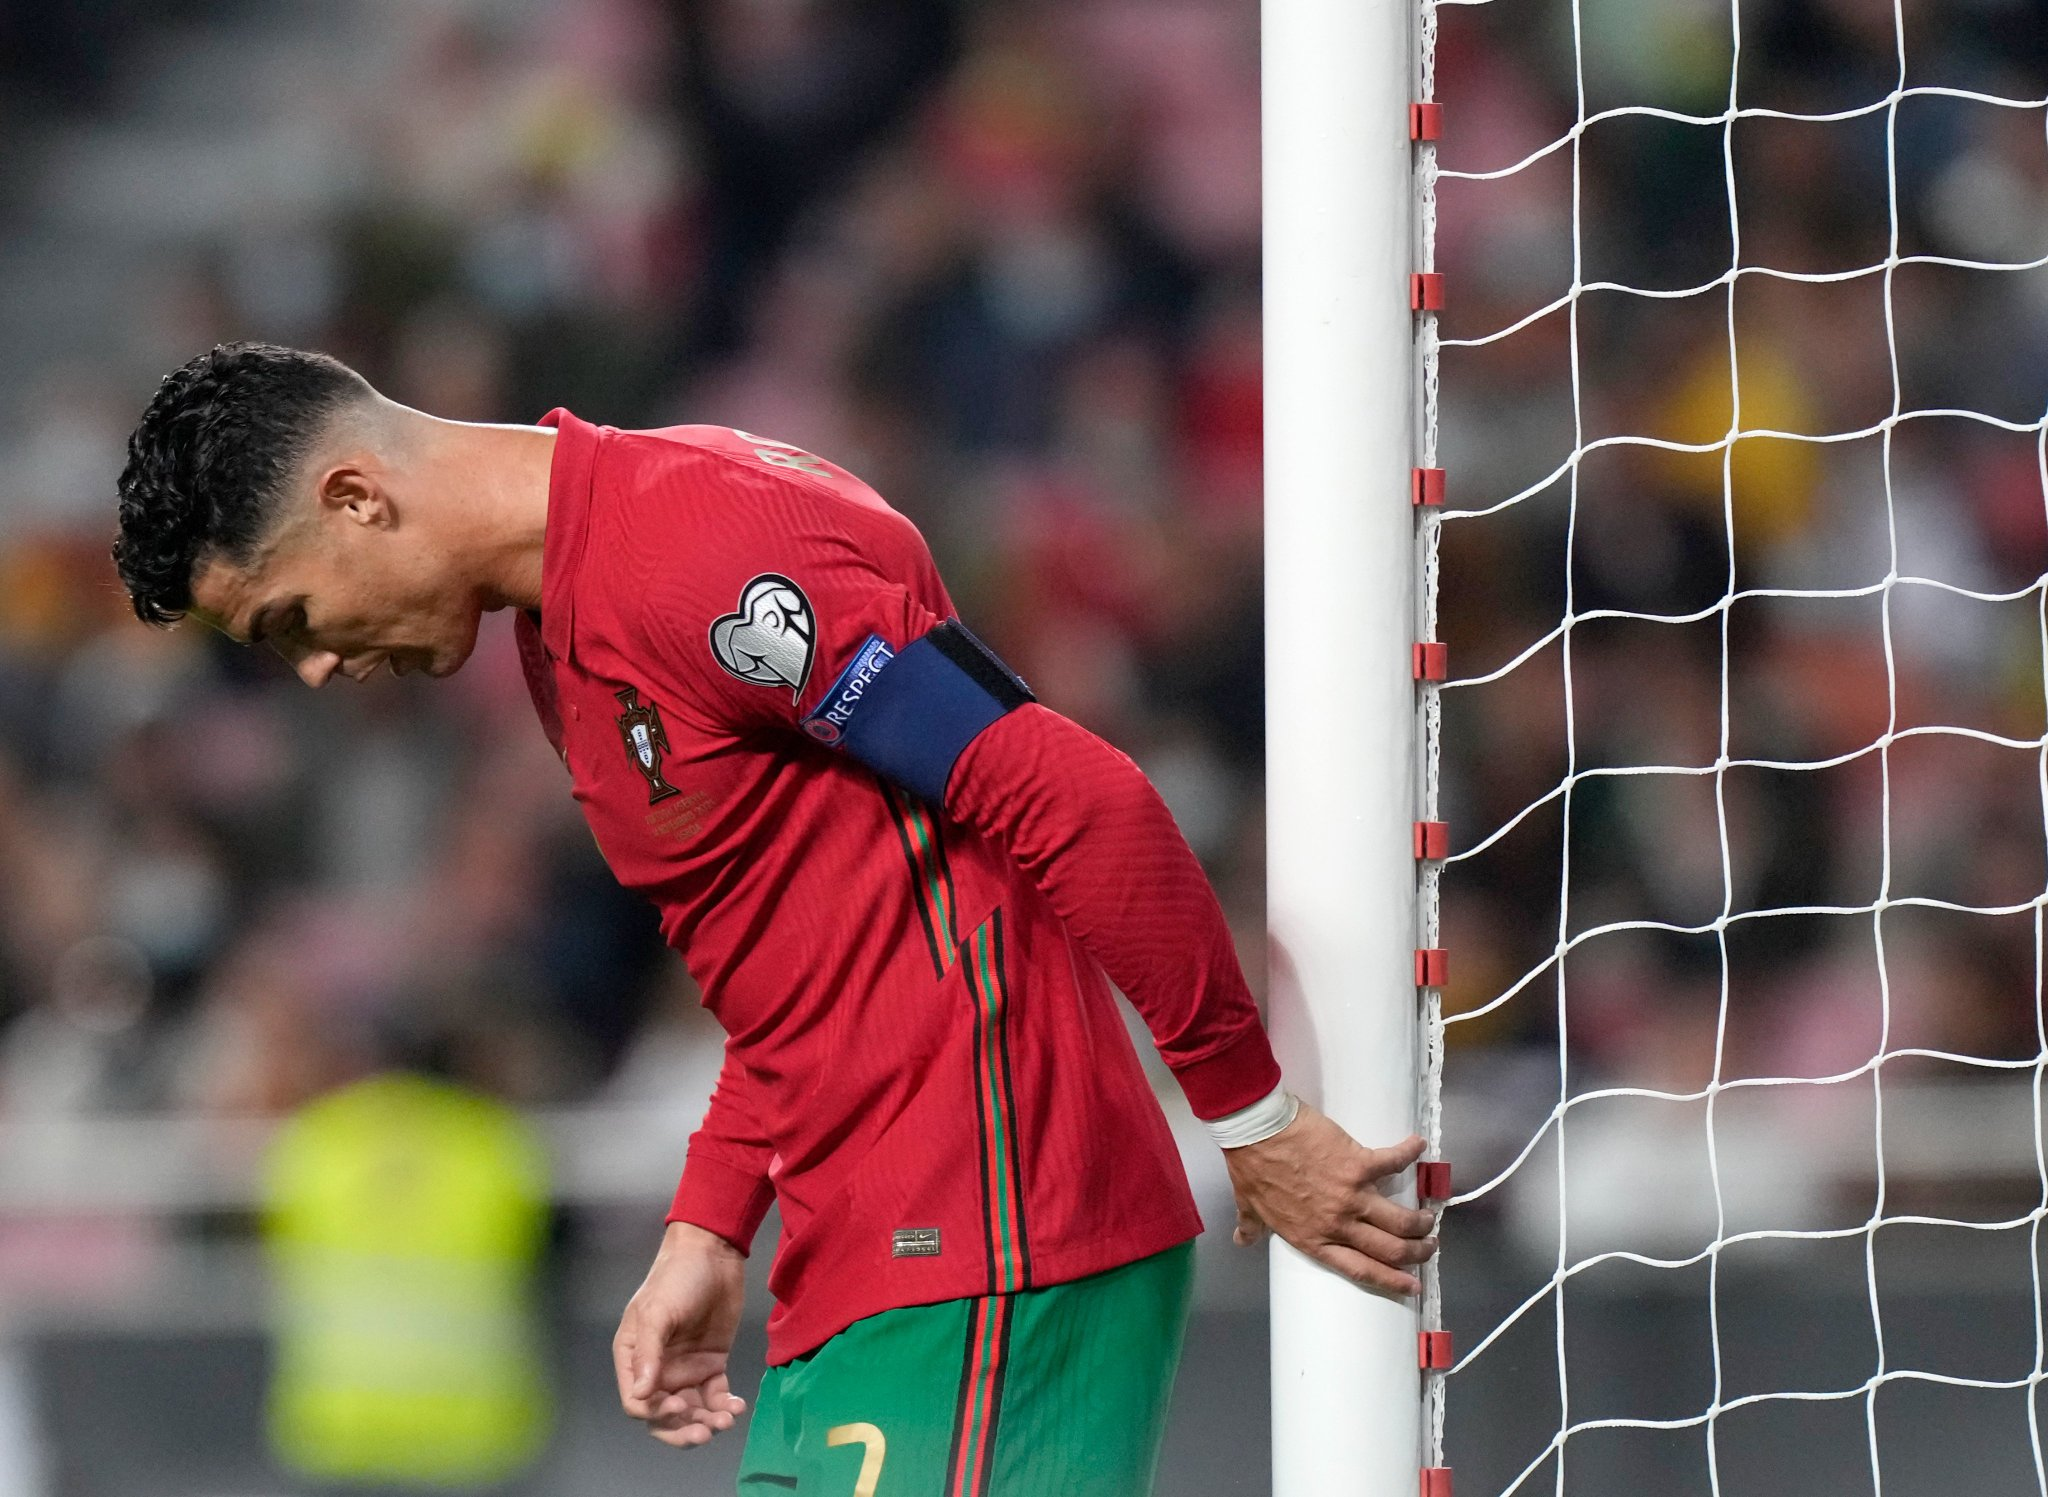 Ronaldo faces shock from Portugal team ahead of the World Cup